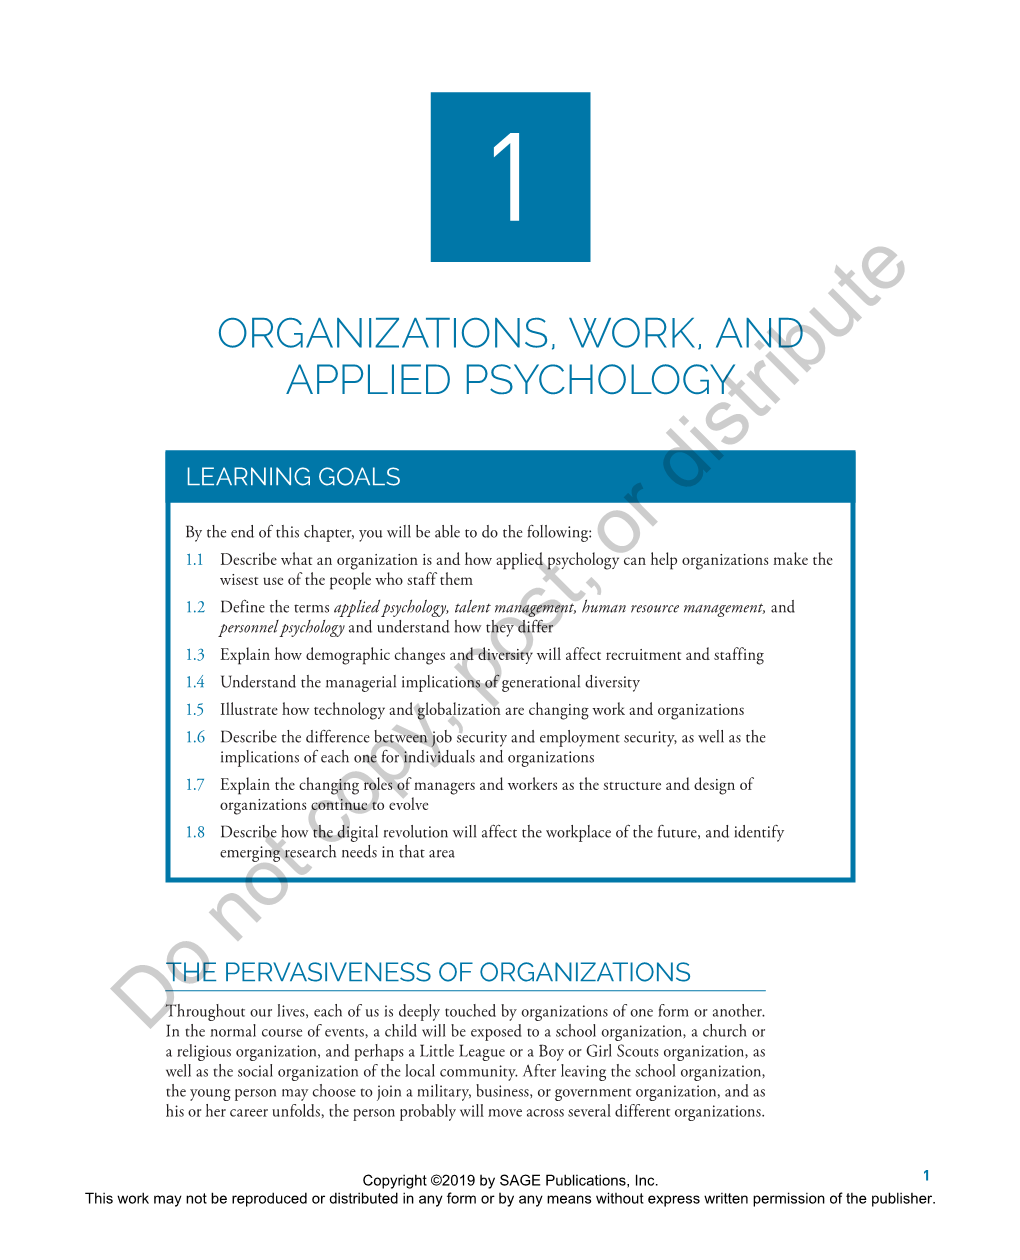 Chapter 1. Organizations, Work, and Applied Psychology